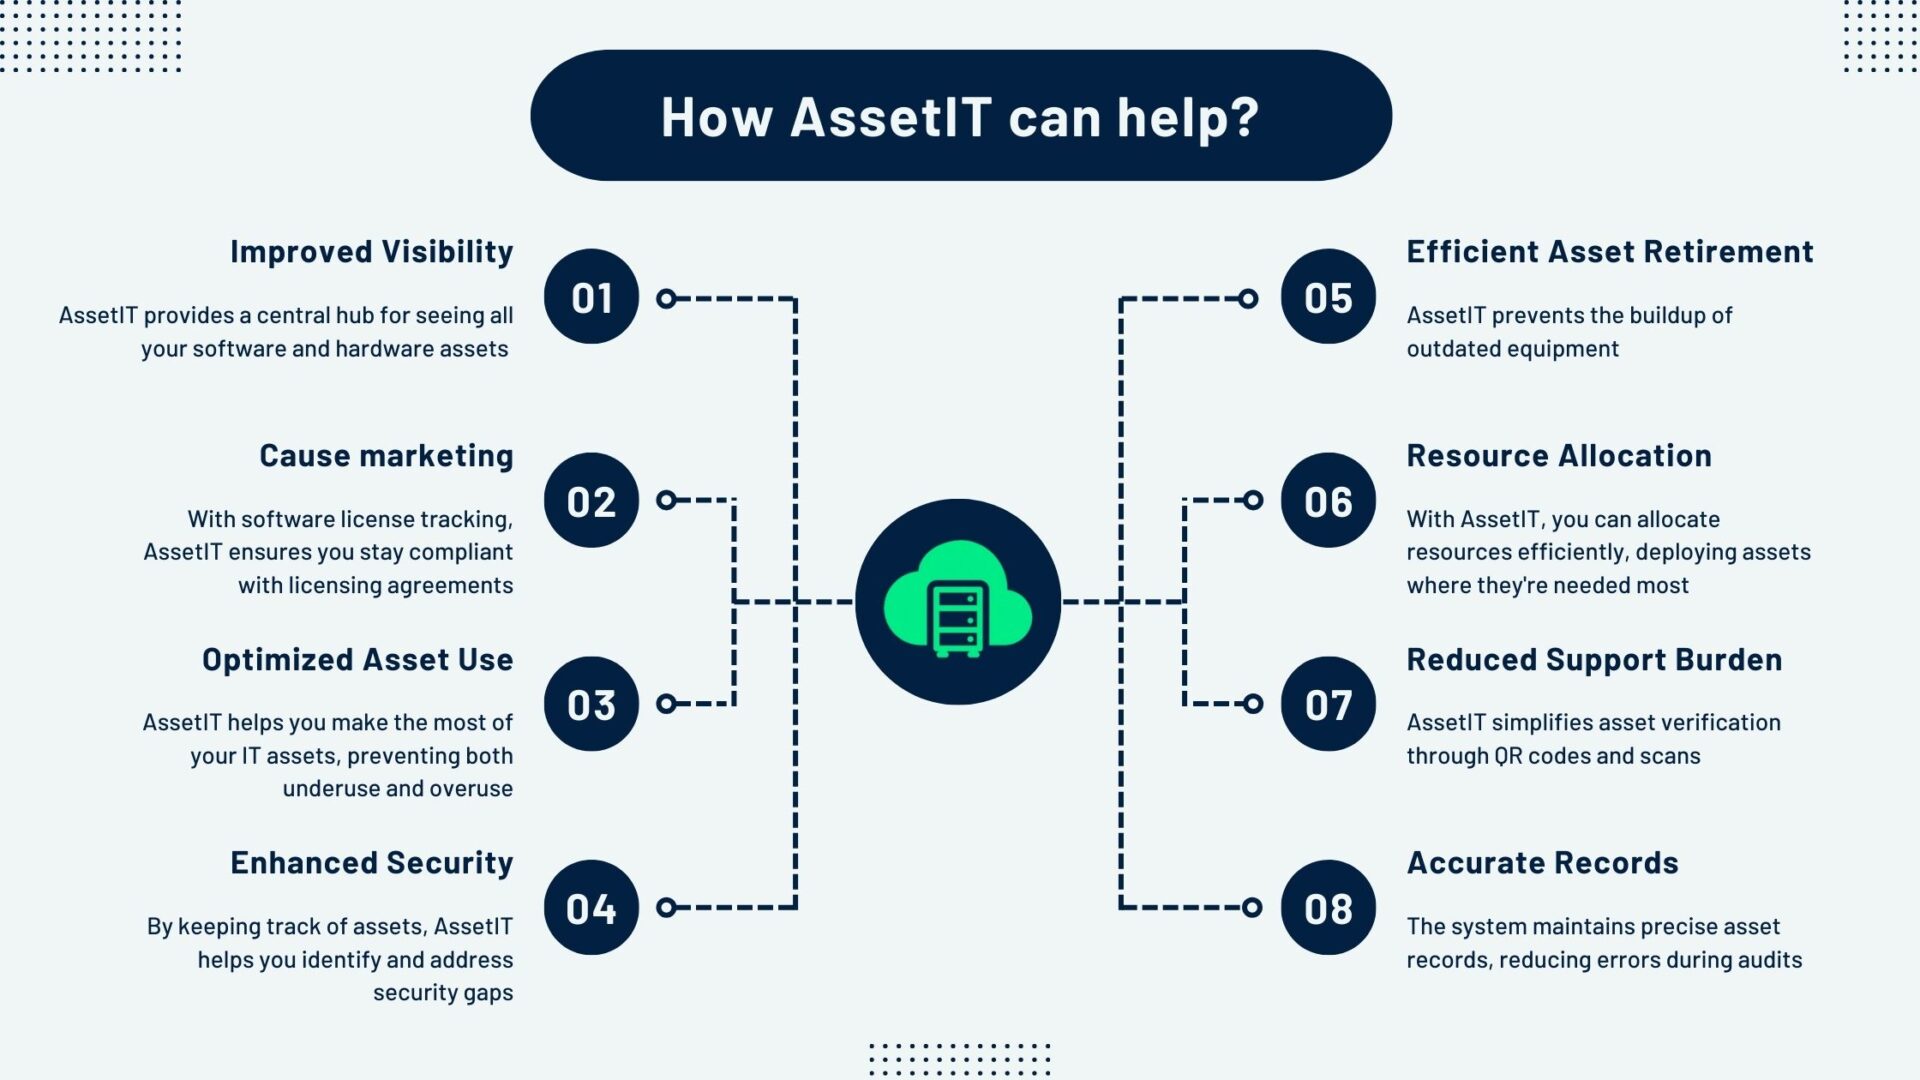 How AssetIT can help organizations get through the challenges